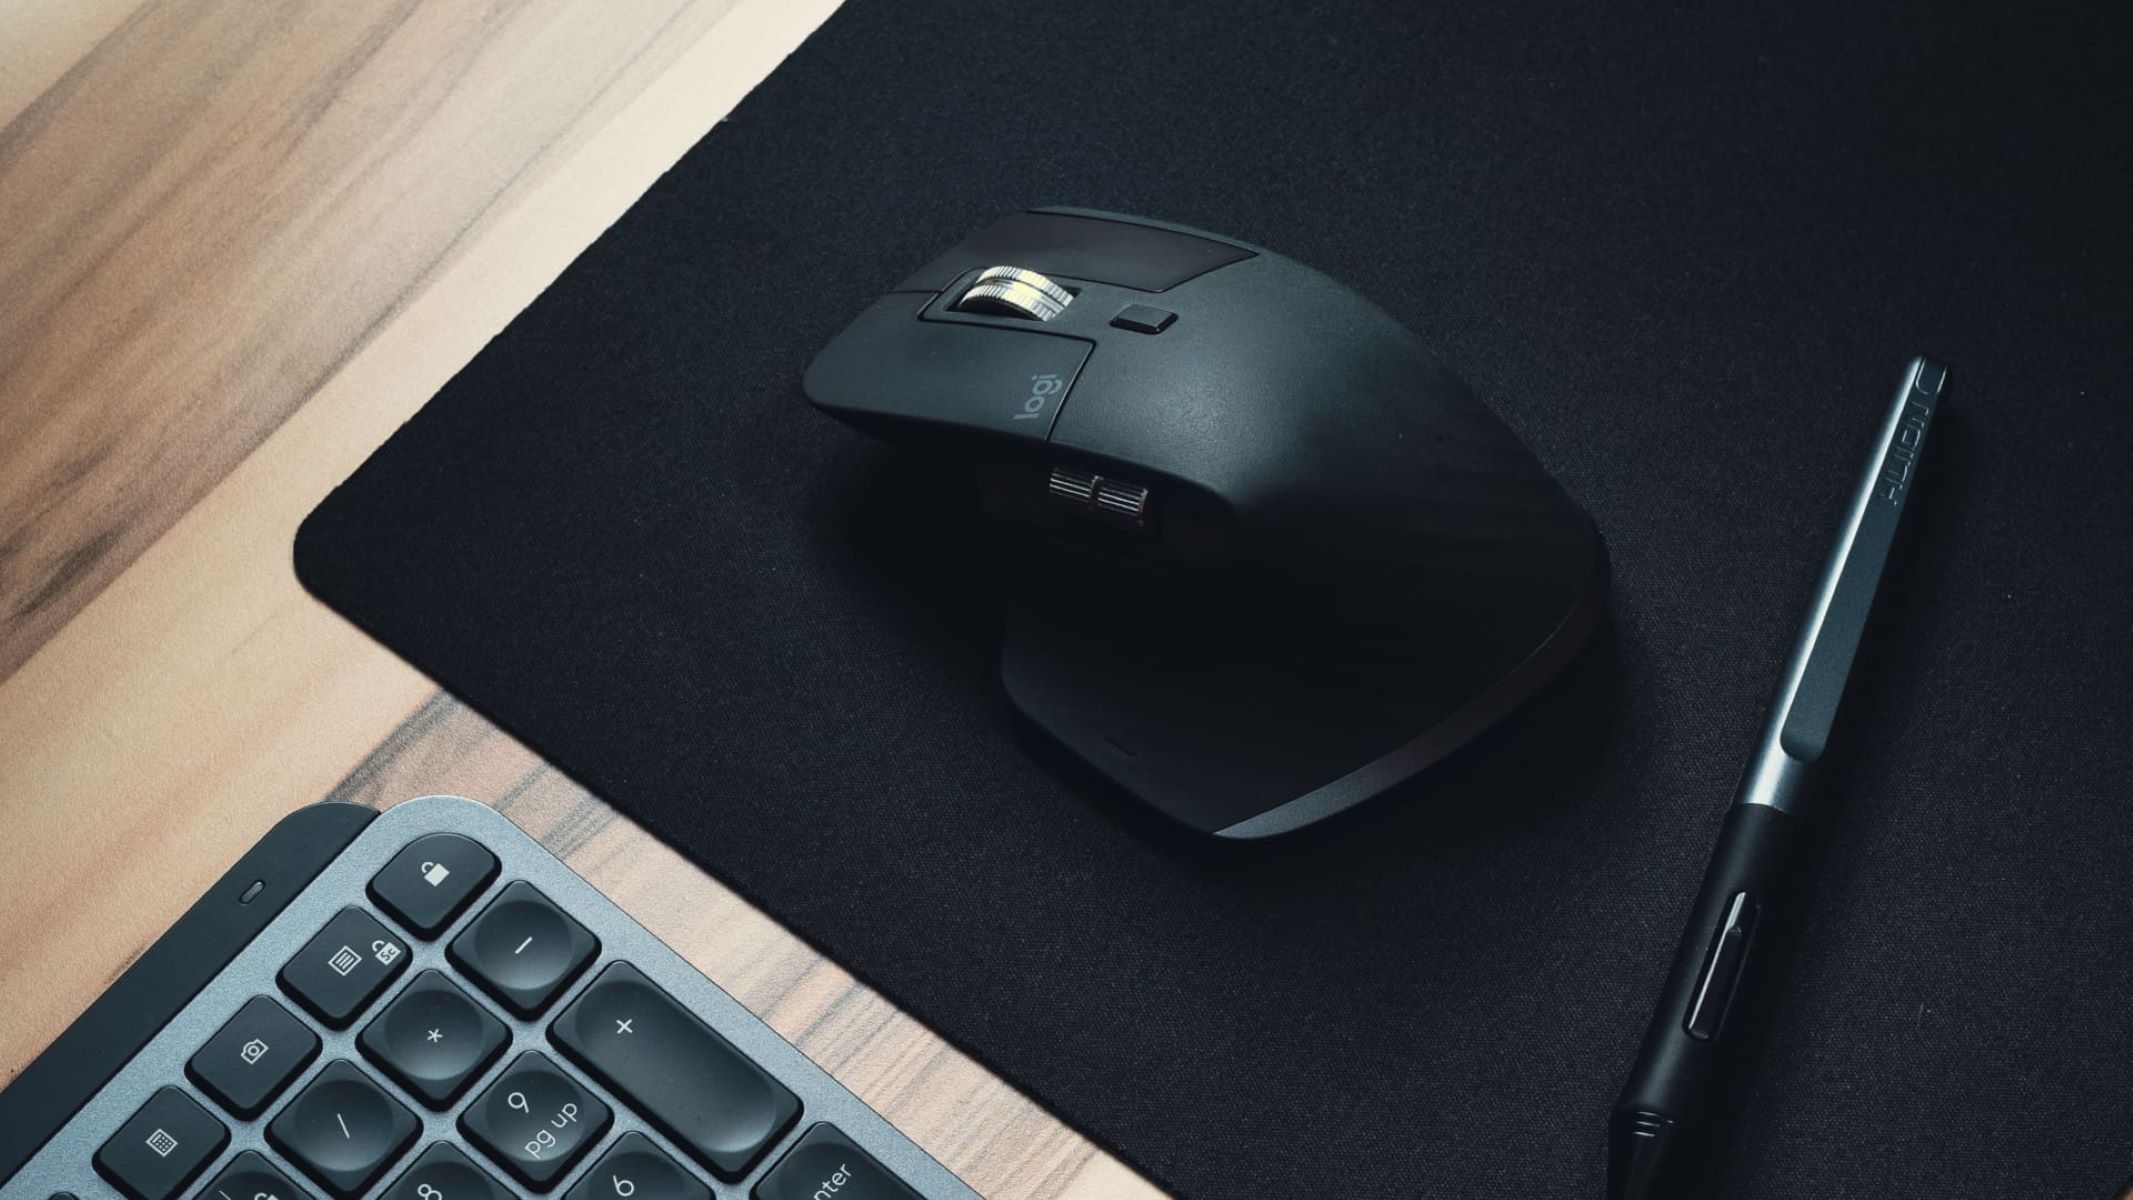 Try an external mouse: Connect an external mouse to confirm if the issue persists with a different input device.
Contact technical support: If none of the above steps resolve the problem, reach out to the device manufacturer or technical support for further assistance.